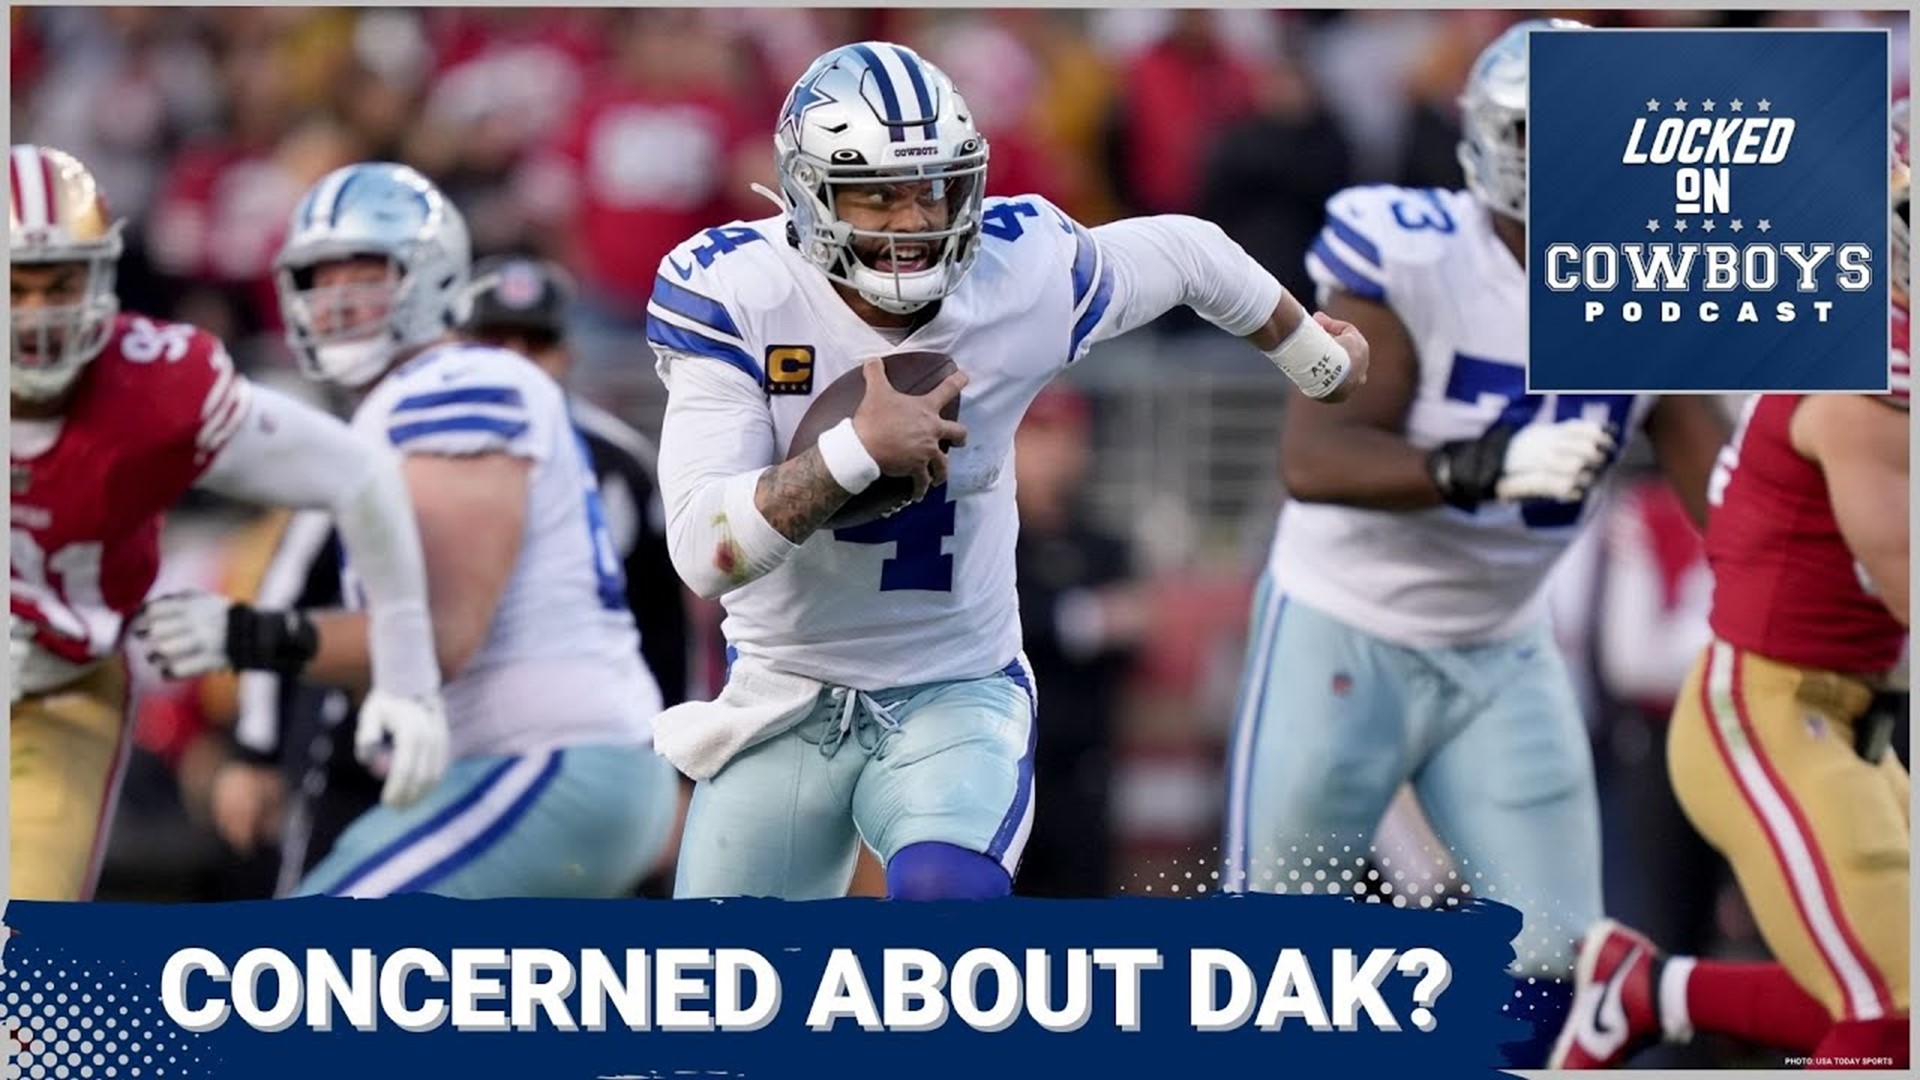 Marcus Mosher and Landon McCool talk whether Cooper Rush will return in 2023 and if the Cowboys should be concerned about Dak Prescott entering next year. Plus more!